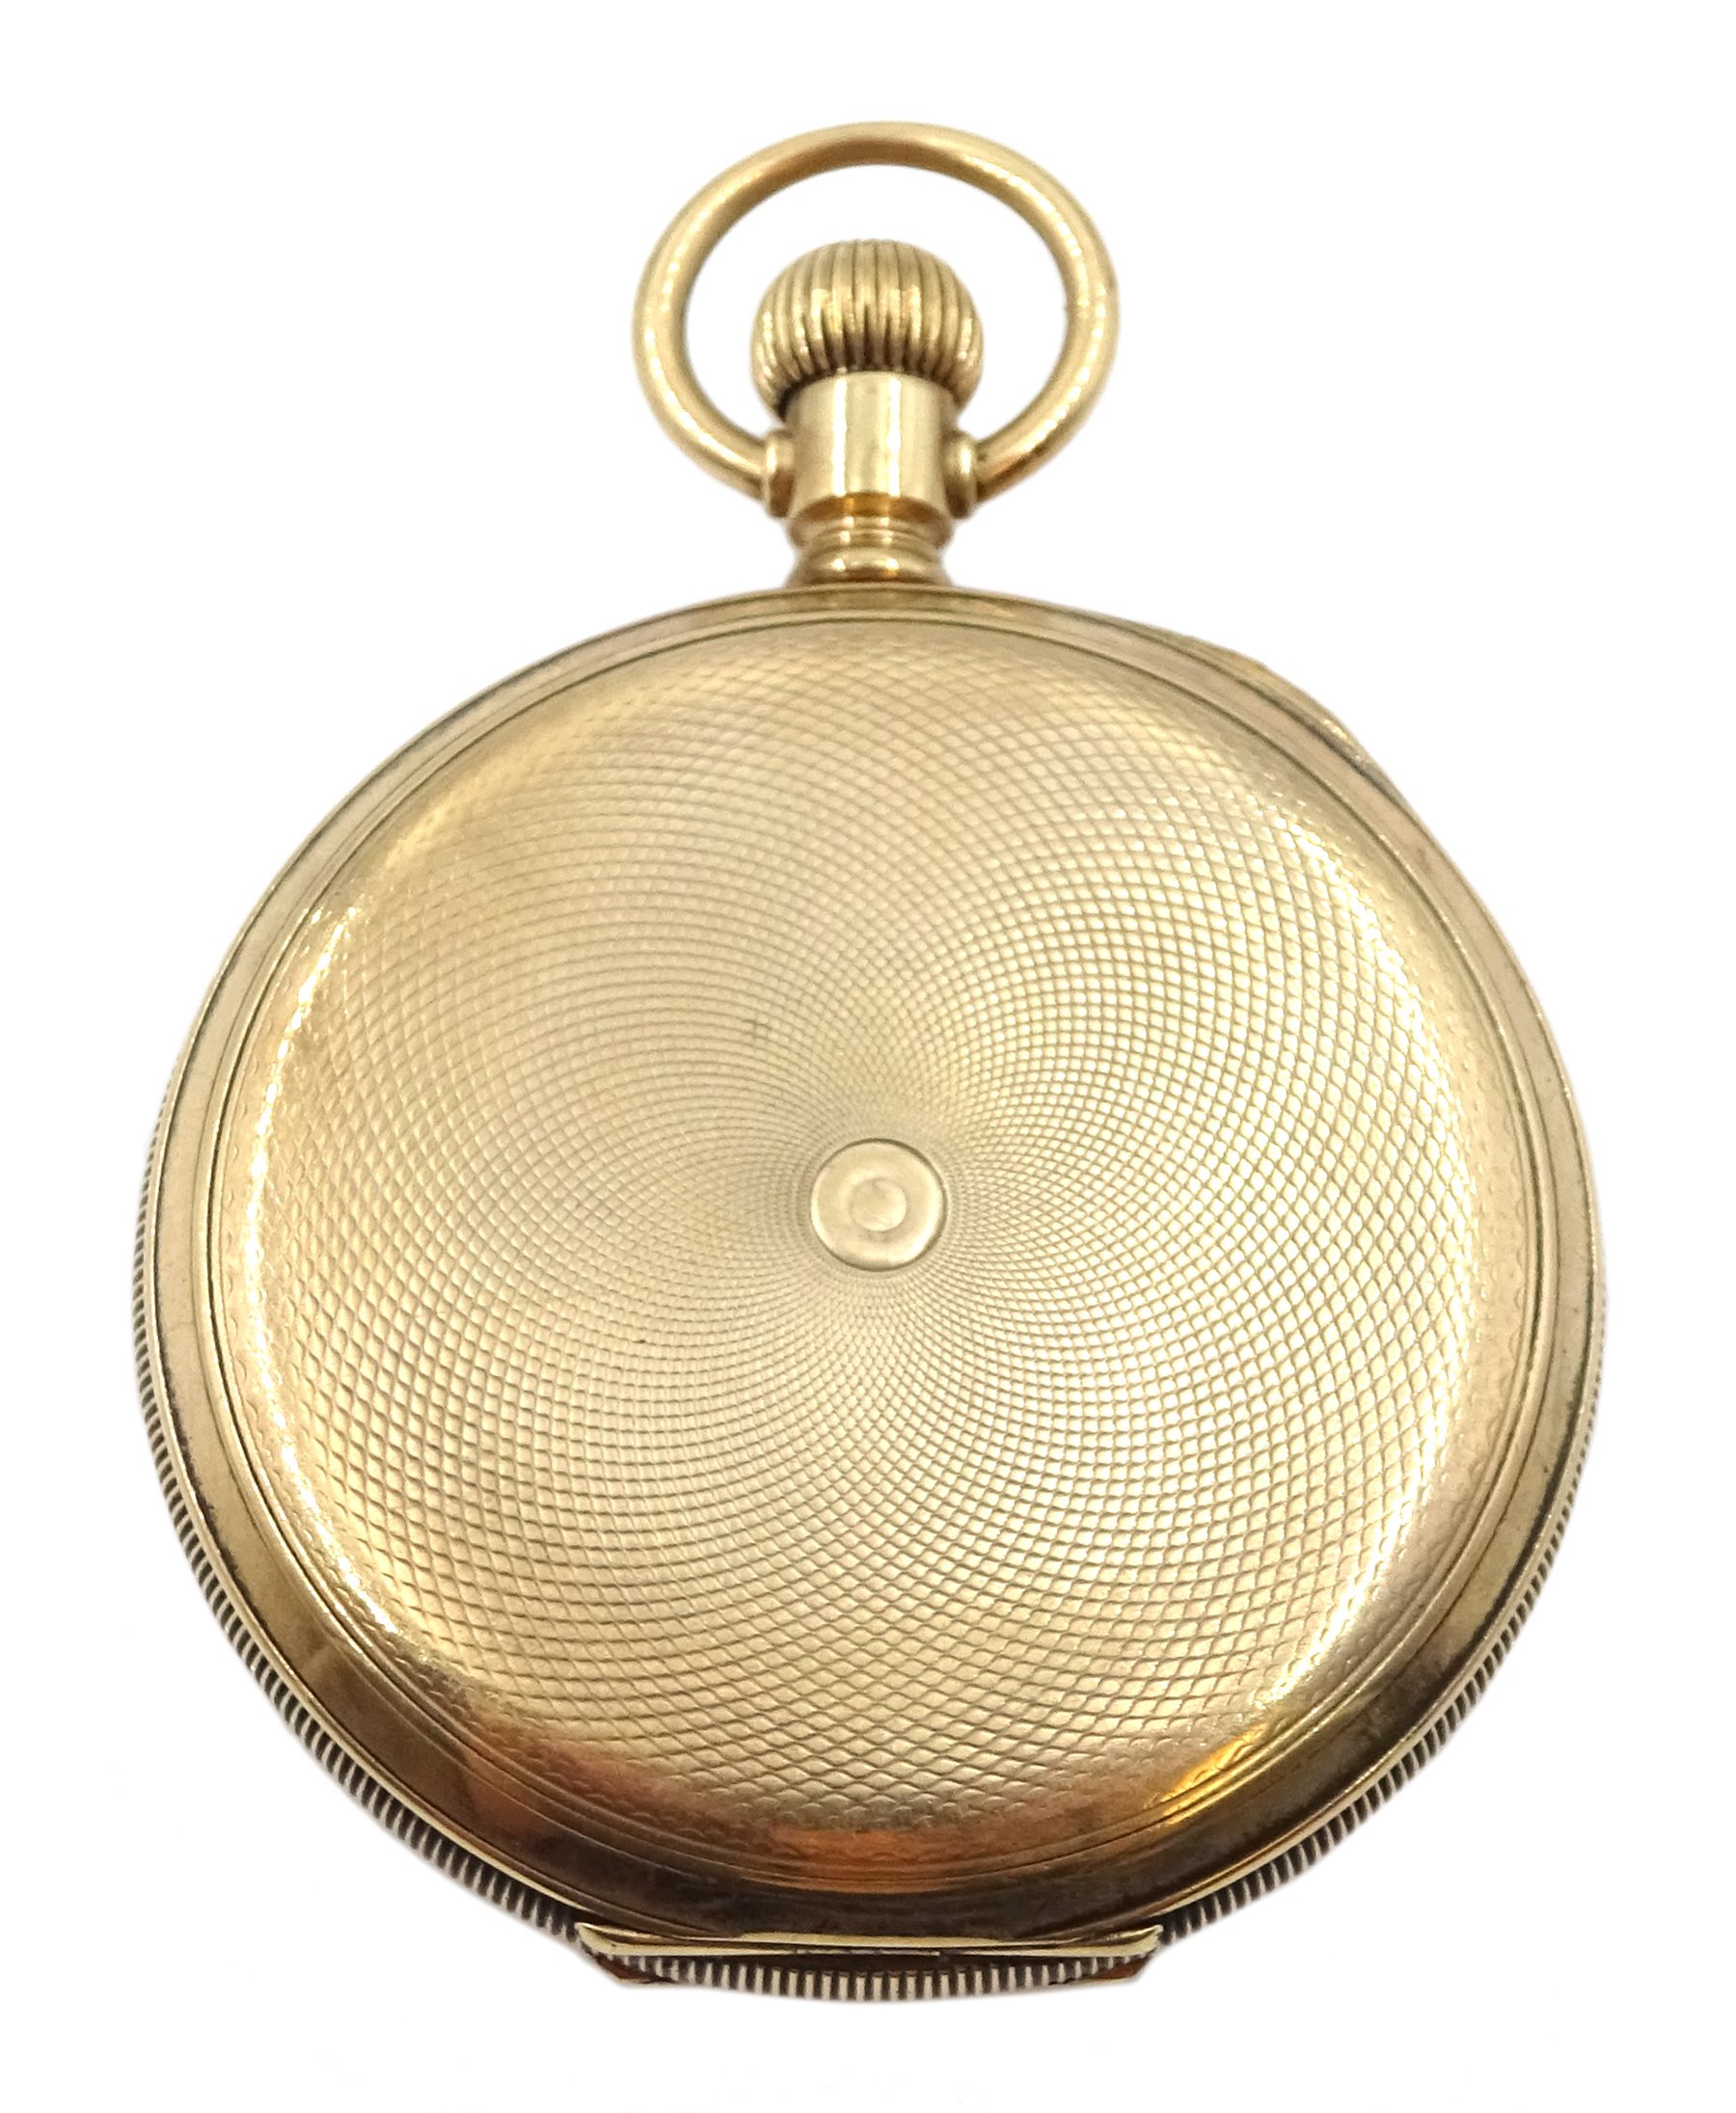 Elgin early 20th century 9ct gold full hunter pocket watch top wound, No. 18741683, case by Keysone - Image 3 of 5